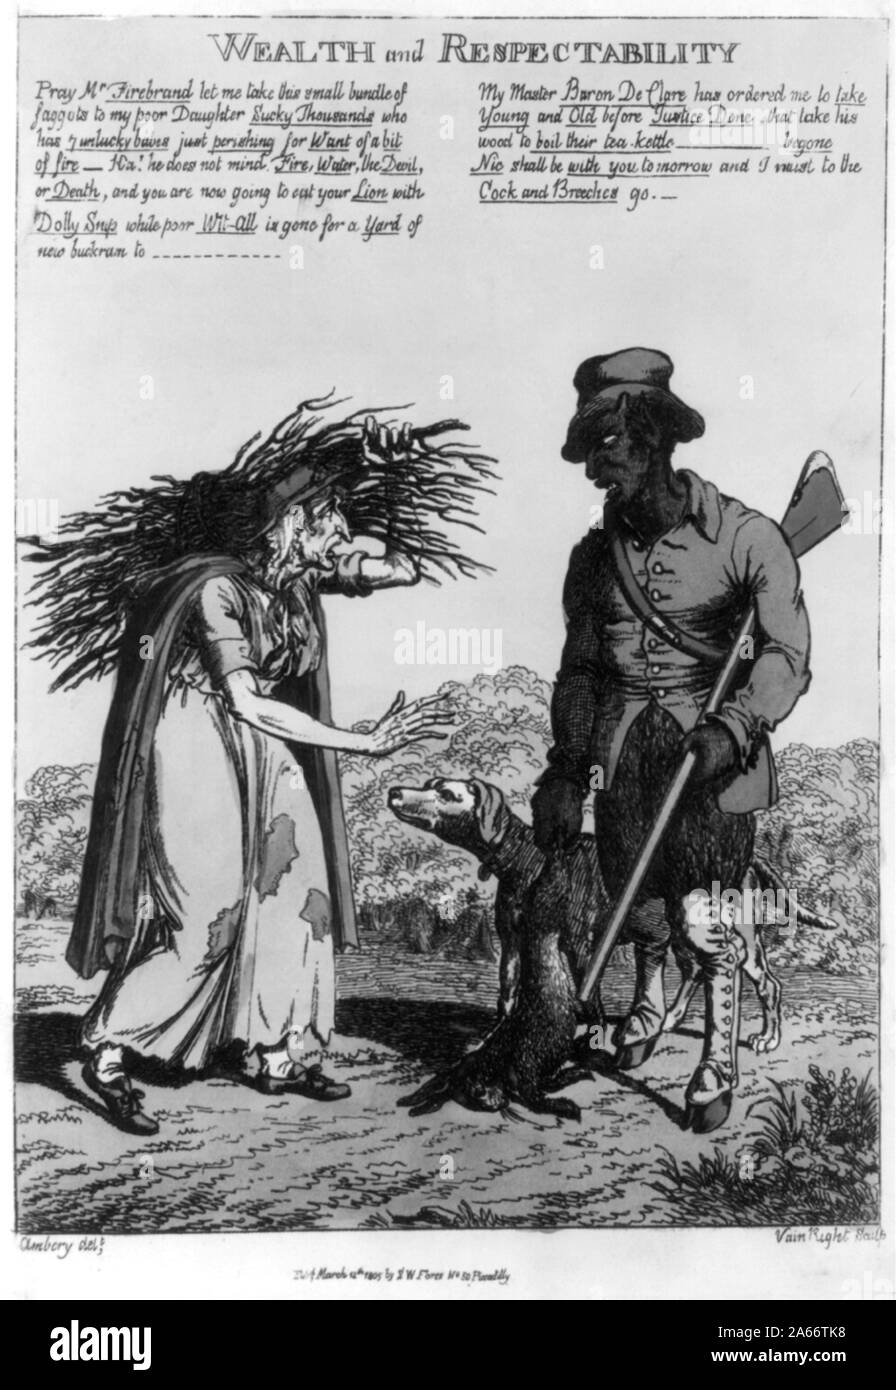 Wealth and respectability Abstract: Negro servant with gun and dogs accosting old woman for poaching a small bundle of twigs. Stock Photo